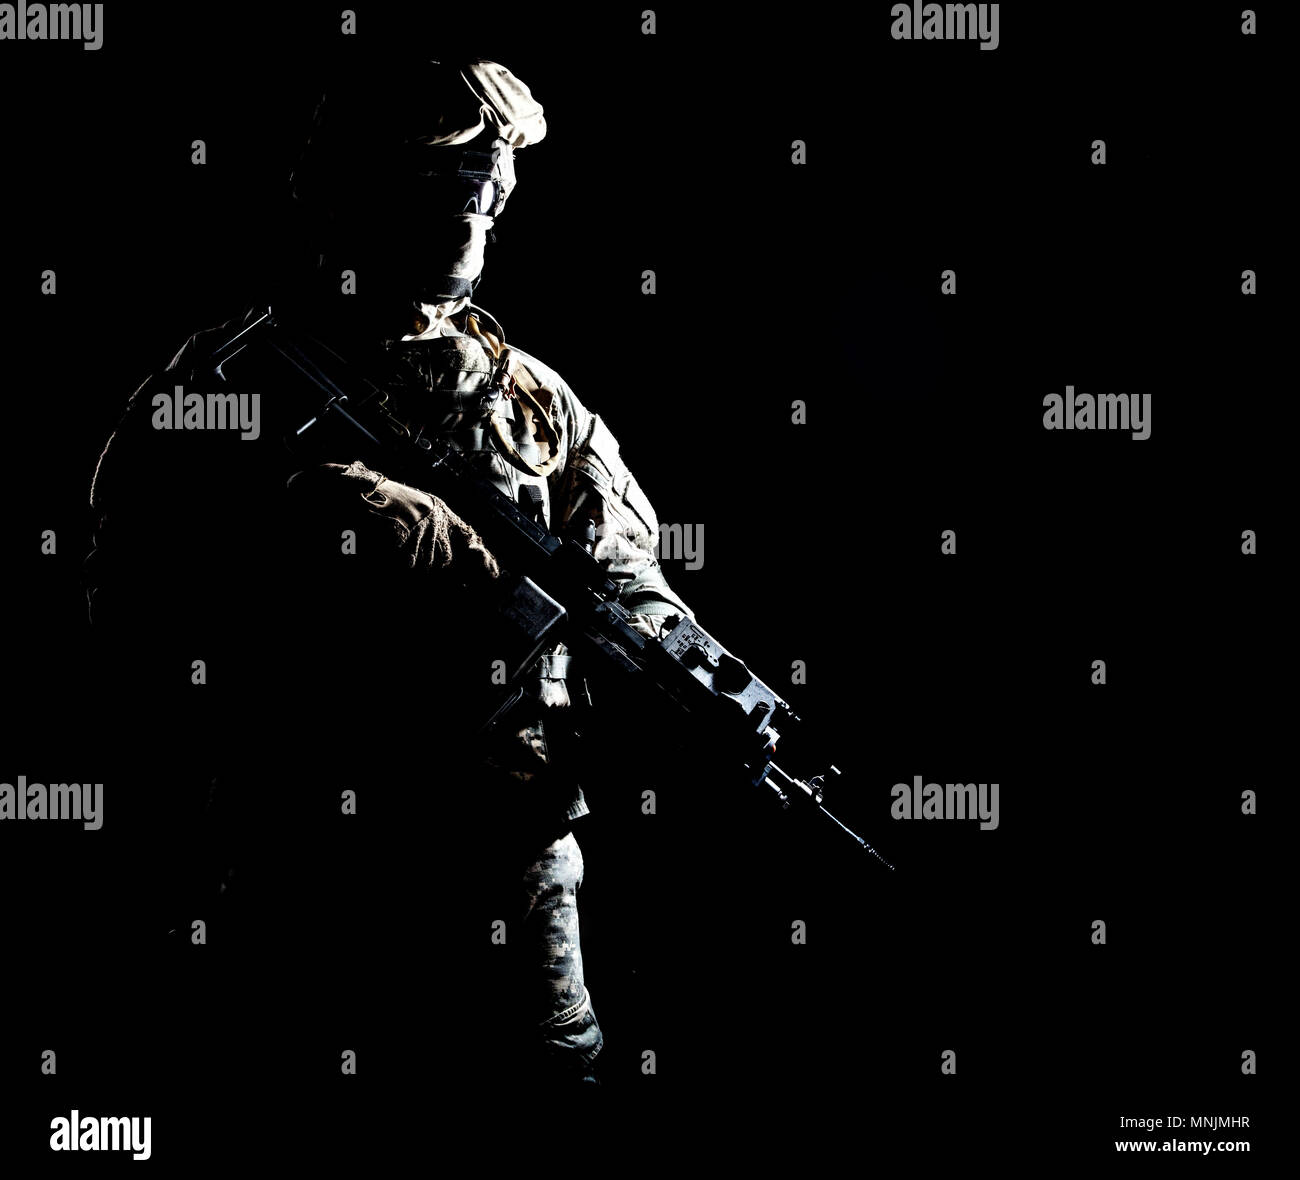 Armed infantryman during night military operation Stock Photo